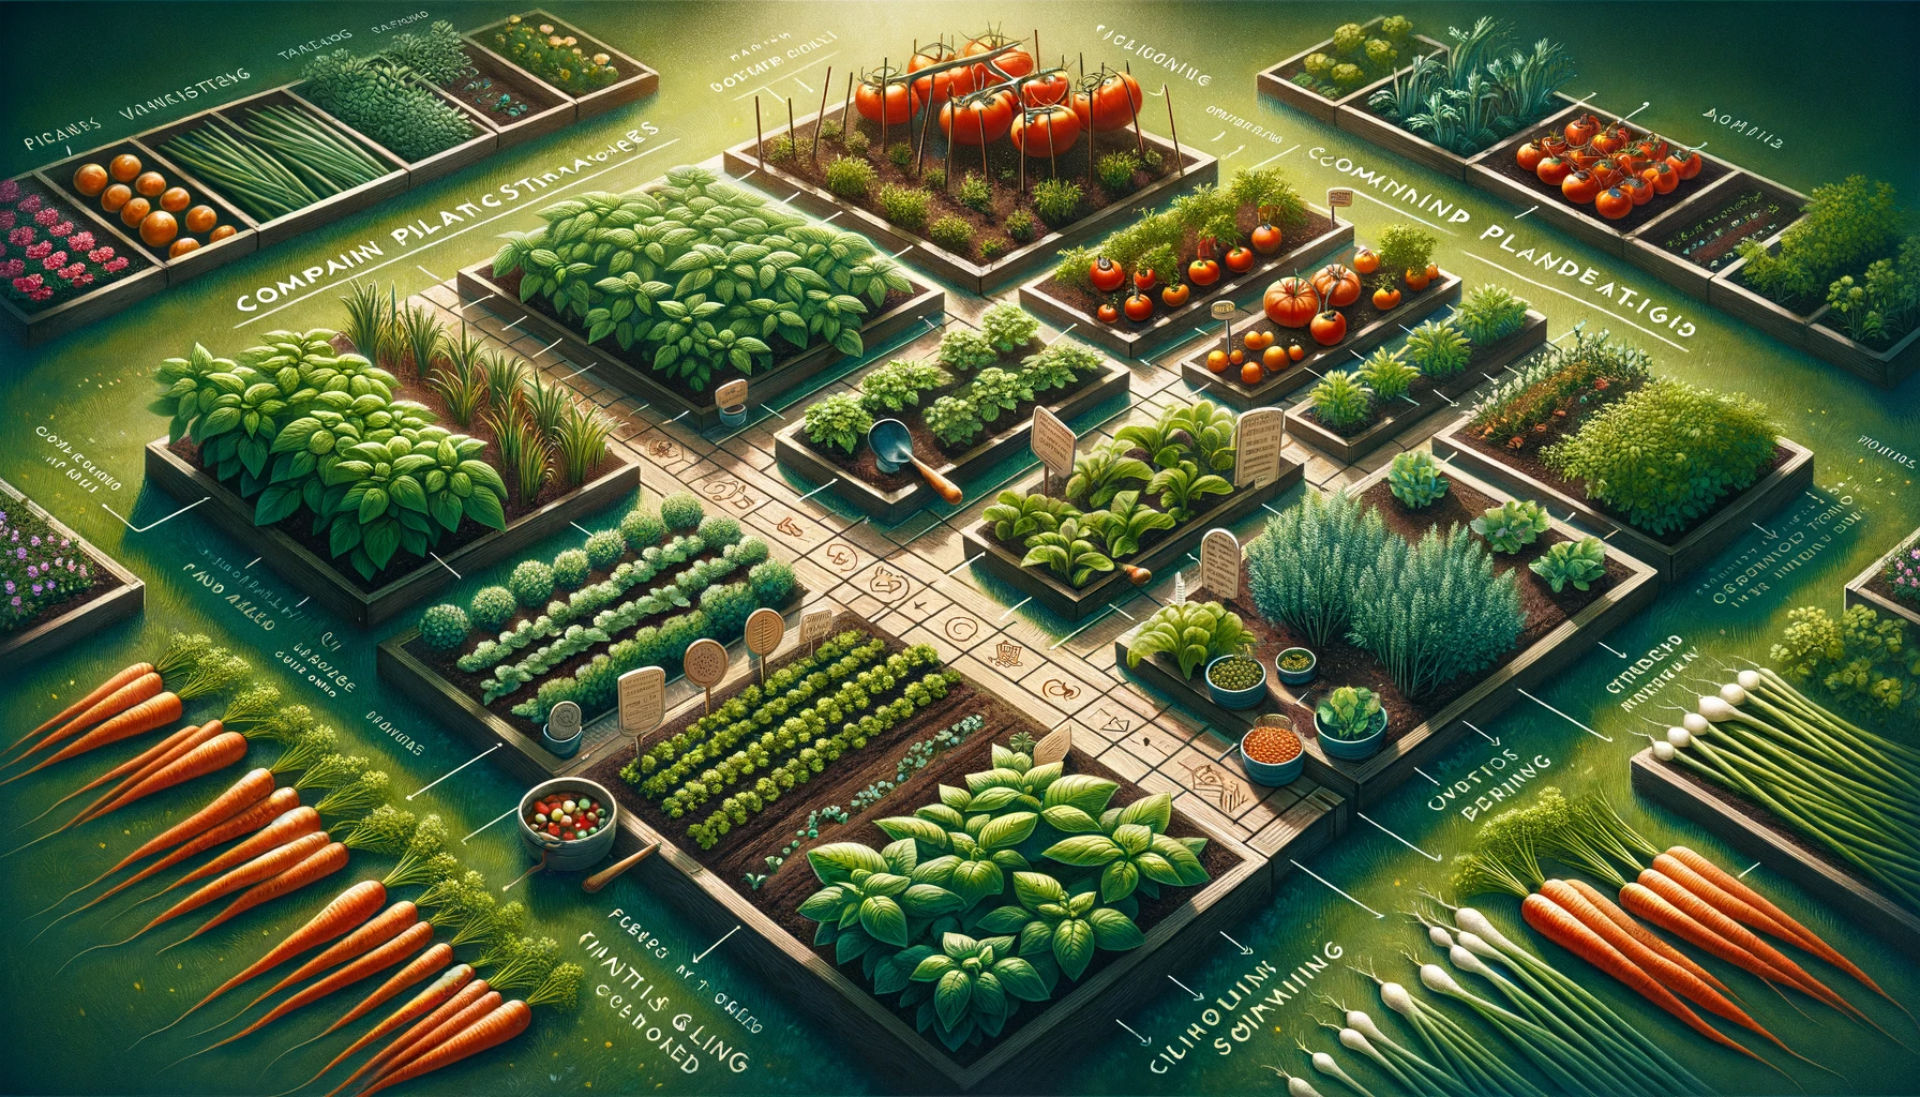 A visual representation of 'Companion Planting Strategies'. The image should feature a garden layout with a variety of plant pairings, demonstrating thoughtful companion planting. Include labels or subtle indicators to show strategic pairings like tomatoes with basil, and carrots with onions. The scene should be organized, with clear pathways and distinct plant areas, illustrating a well-planned companion planting system. Emphasize the thoughtful arrangement and the benefits it brings to the garden, like pest control, nutrient sharing, and pollination enhancement.